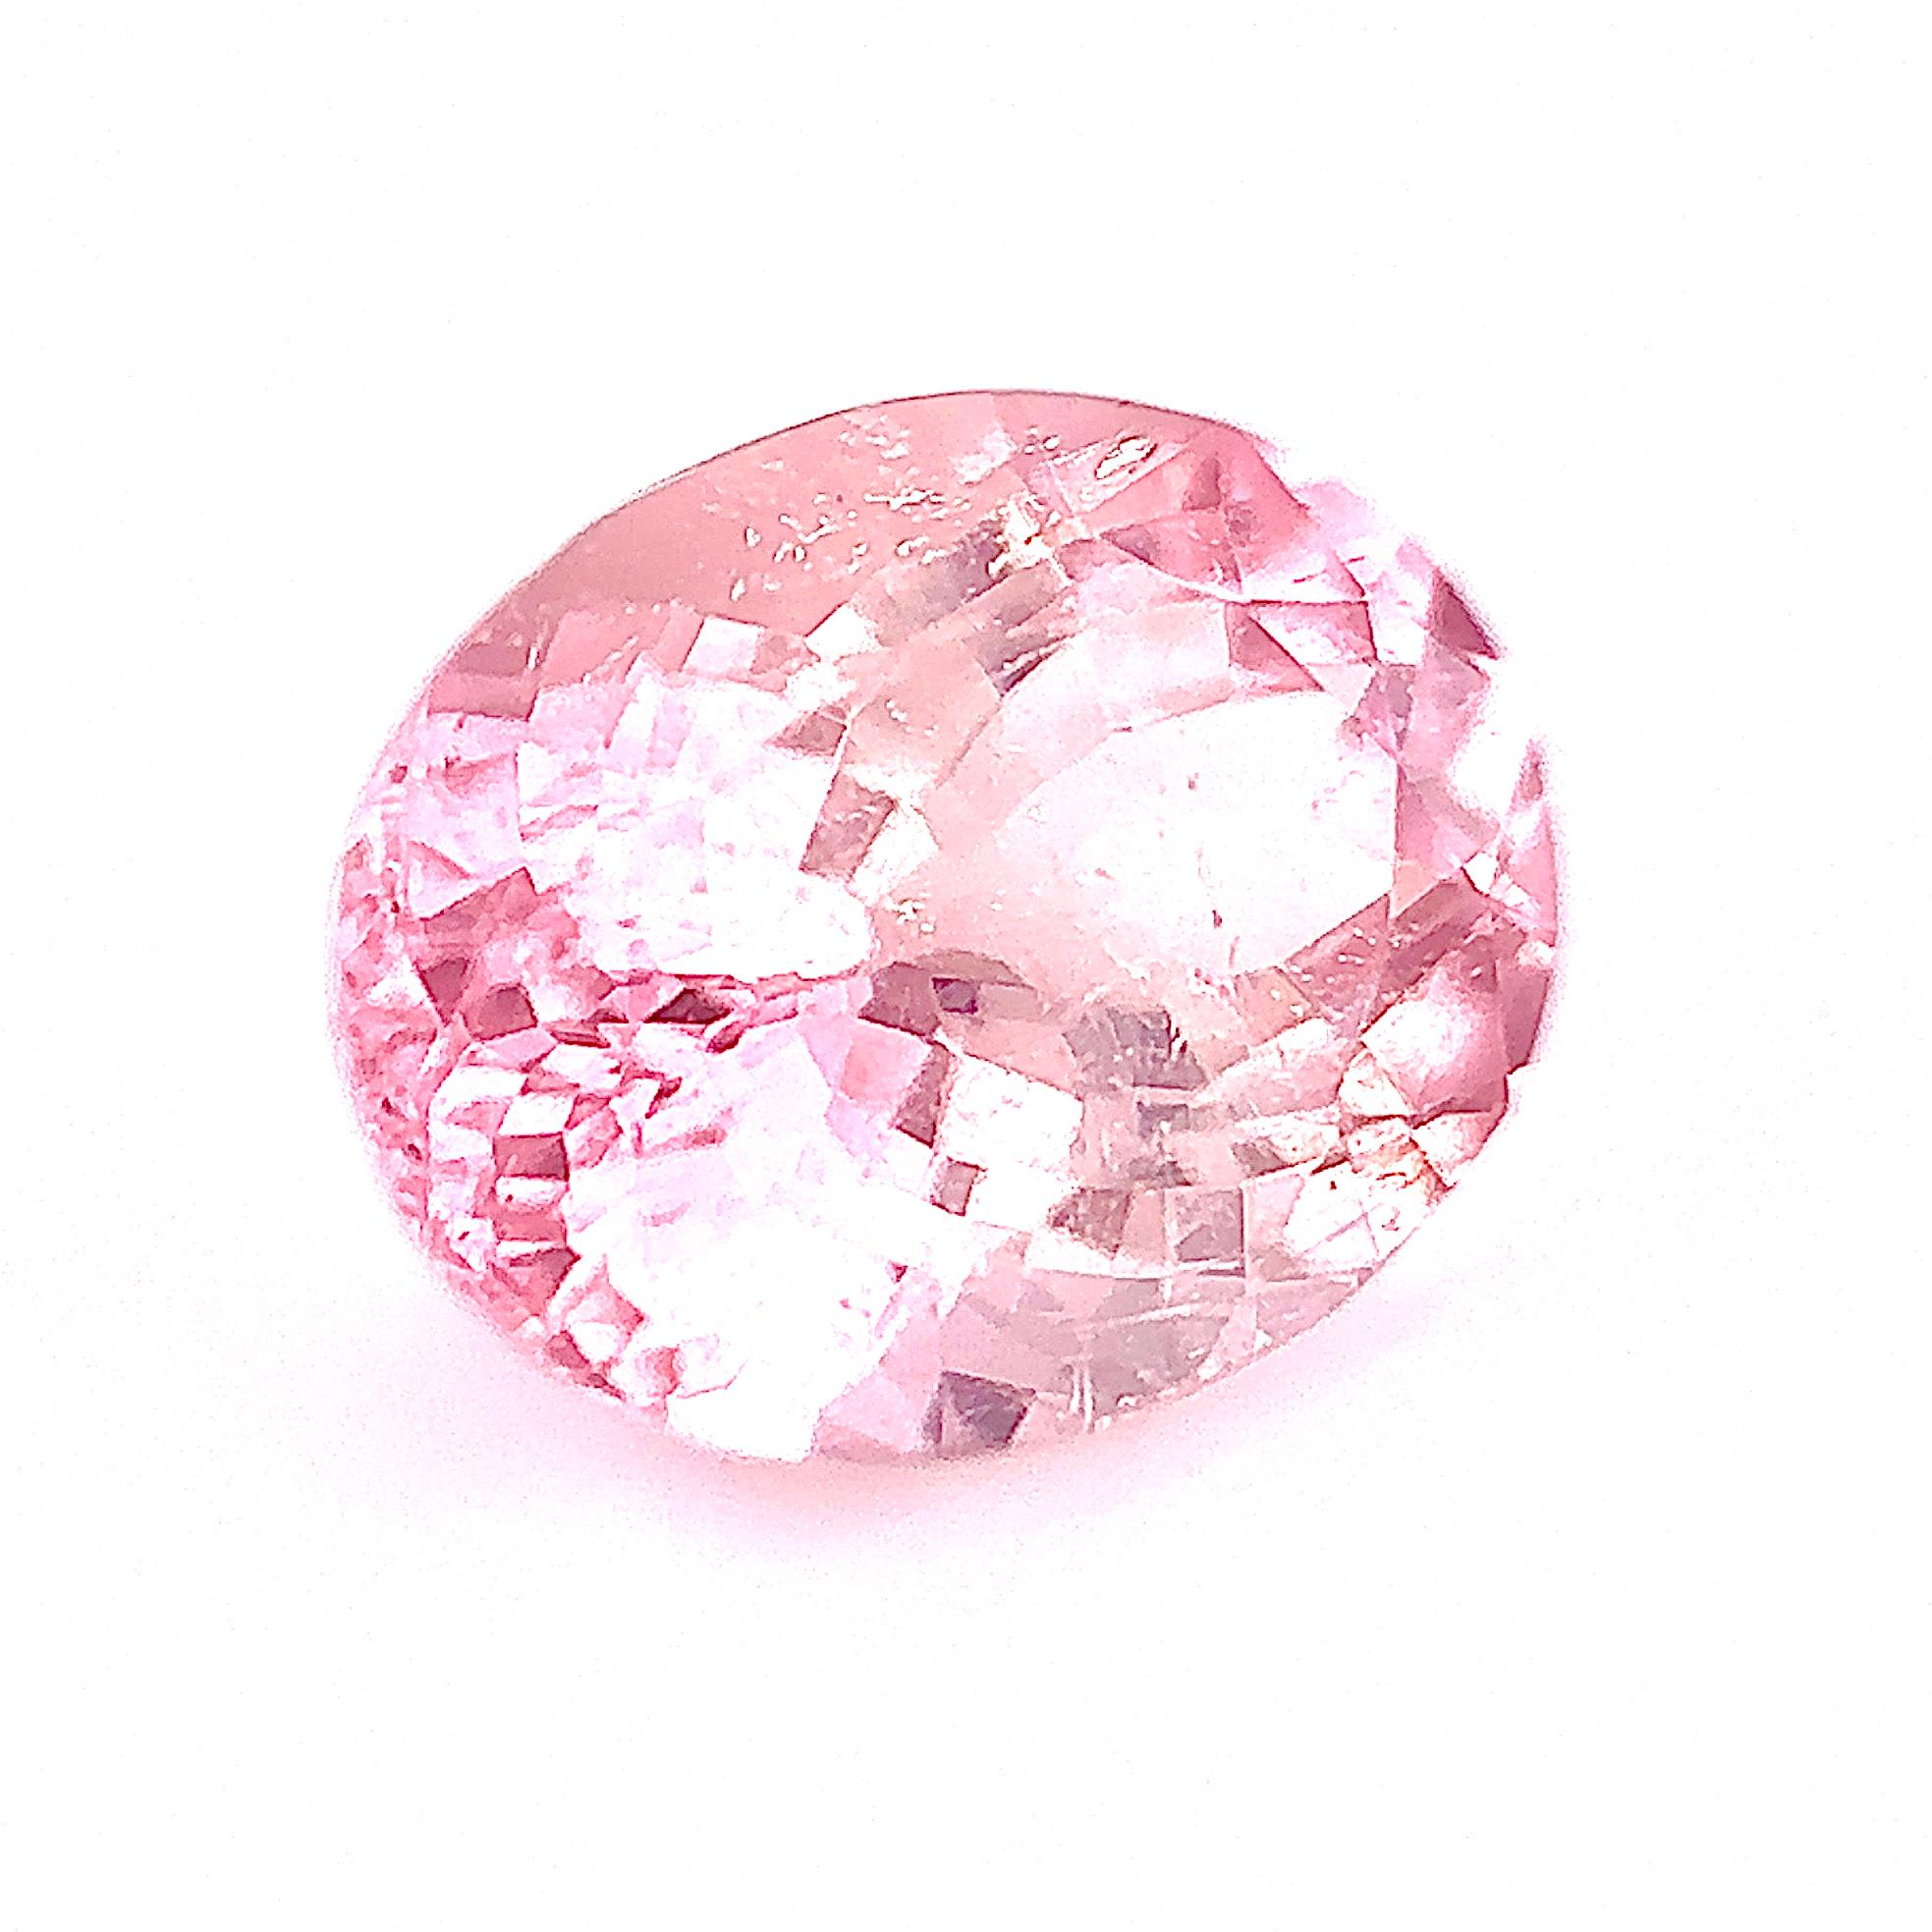 2.70 Carat Natural Tourmaline Loose stone in Cherry Blossom Pink 

GRS/GCS/GIA appointed lab certificate can be arranged upon request

To design your own jewellery, Xuelai Jewellery London offers a world-class bespoke experience for private clients;